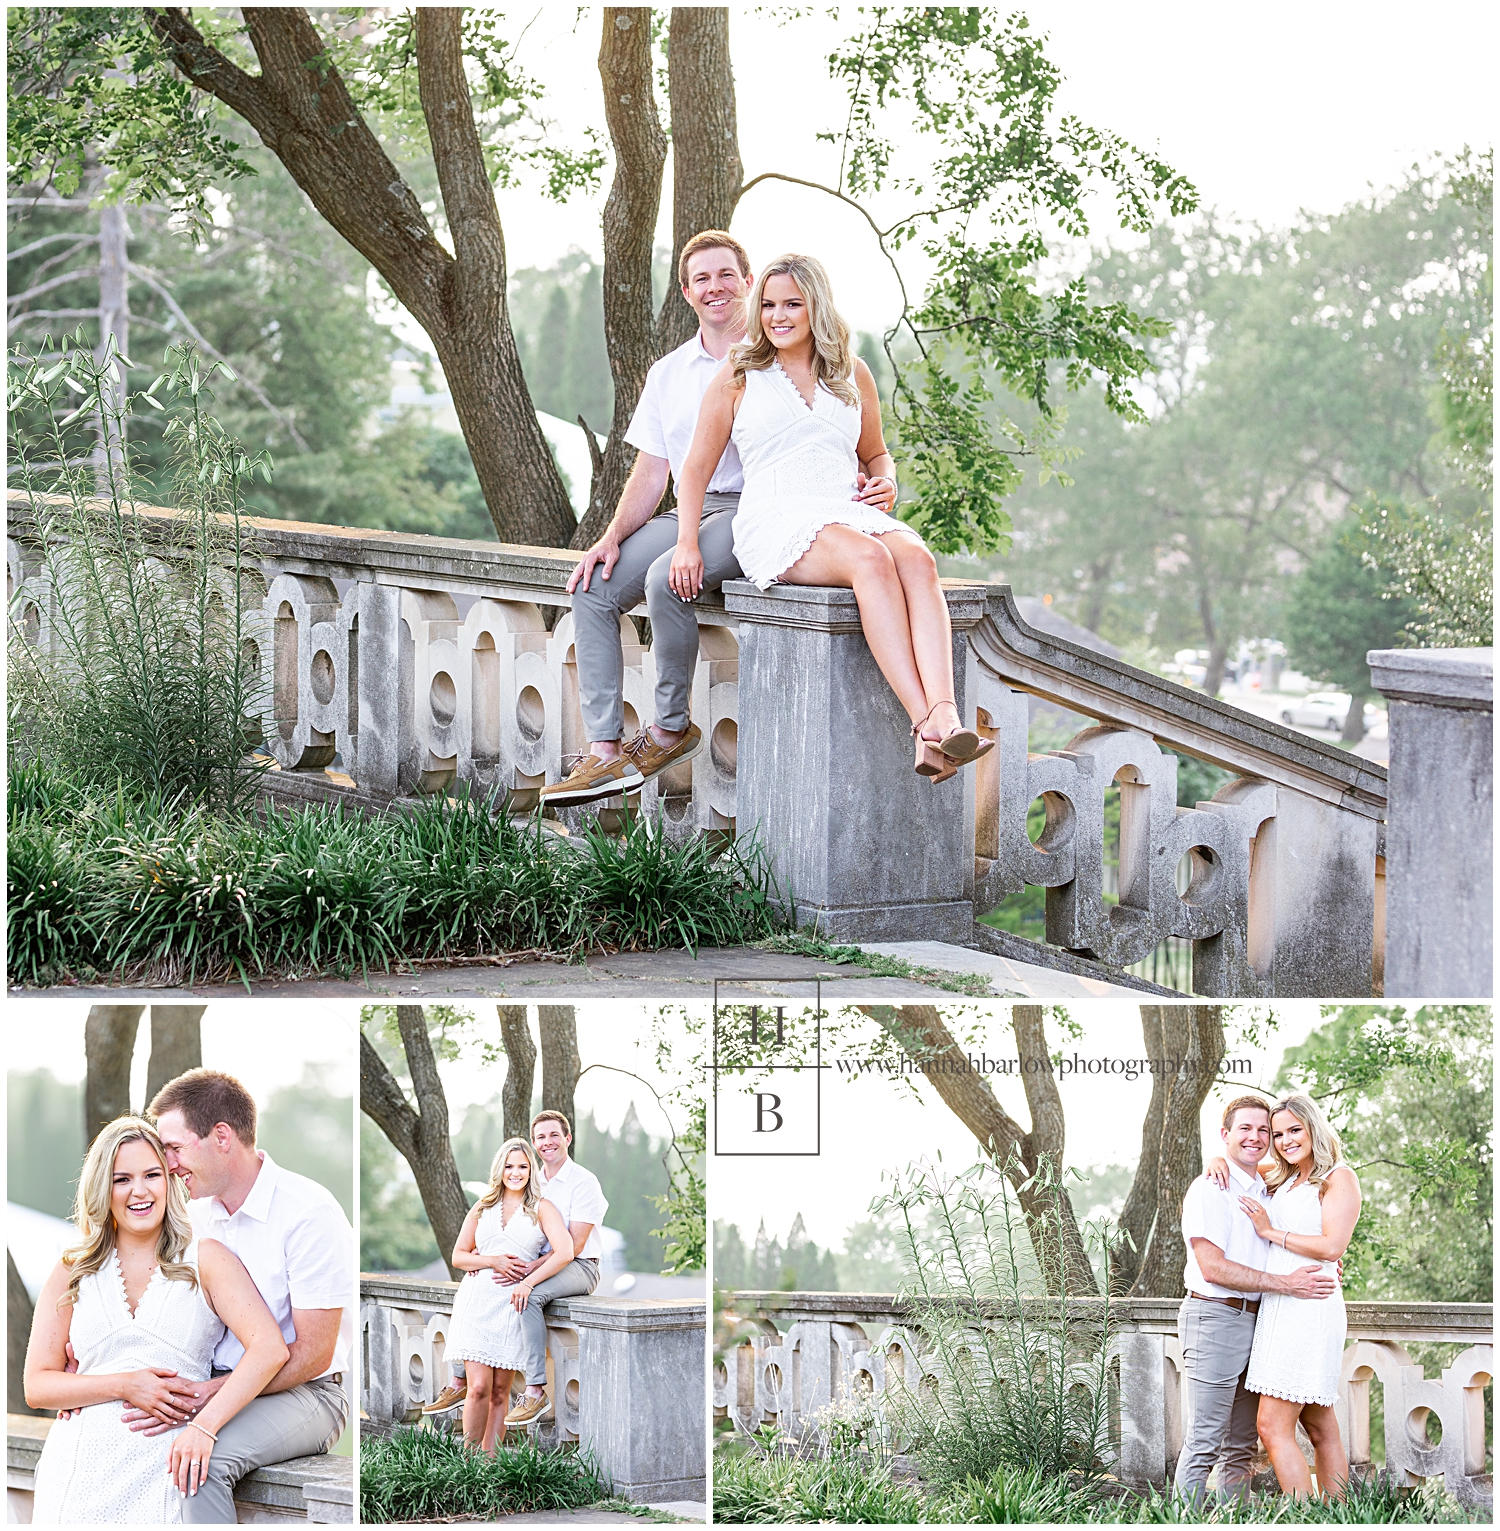 Lady in white dress with man in white shirt sits on stone wall and poses for engagement photos.